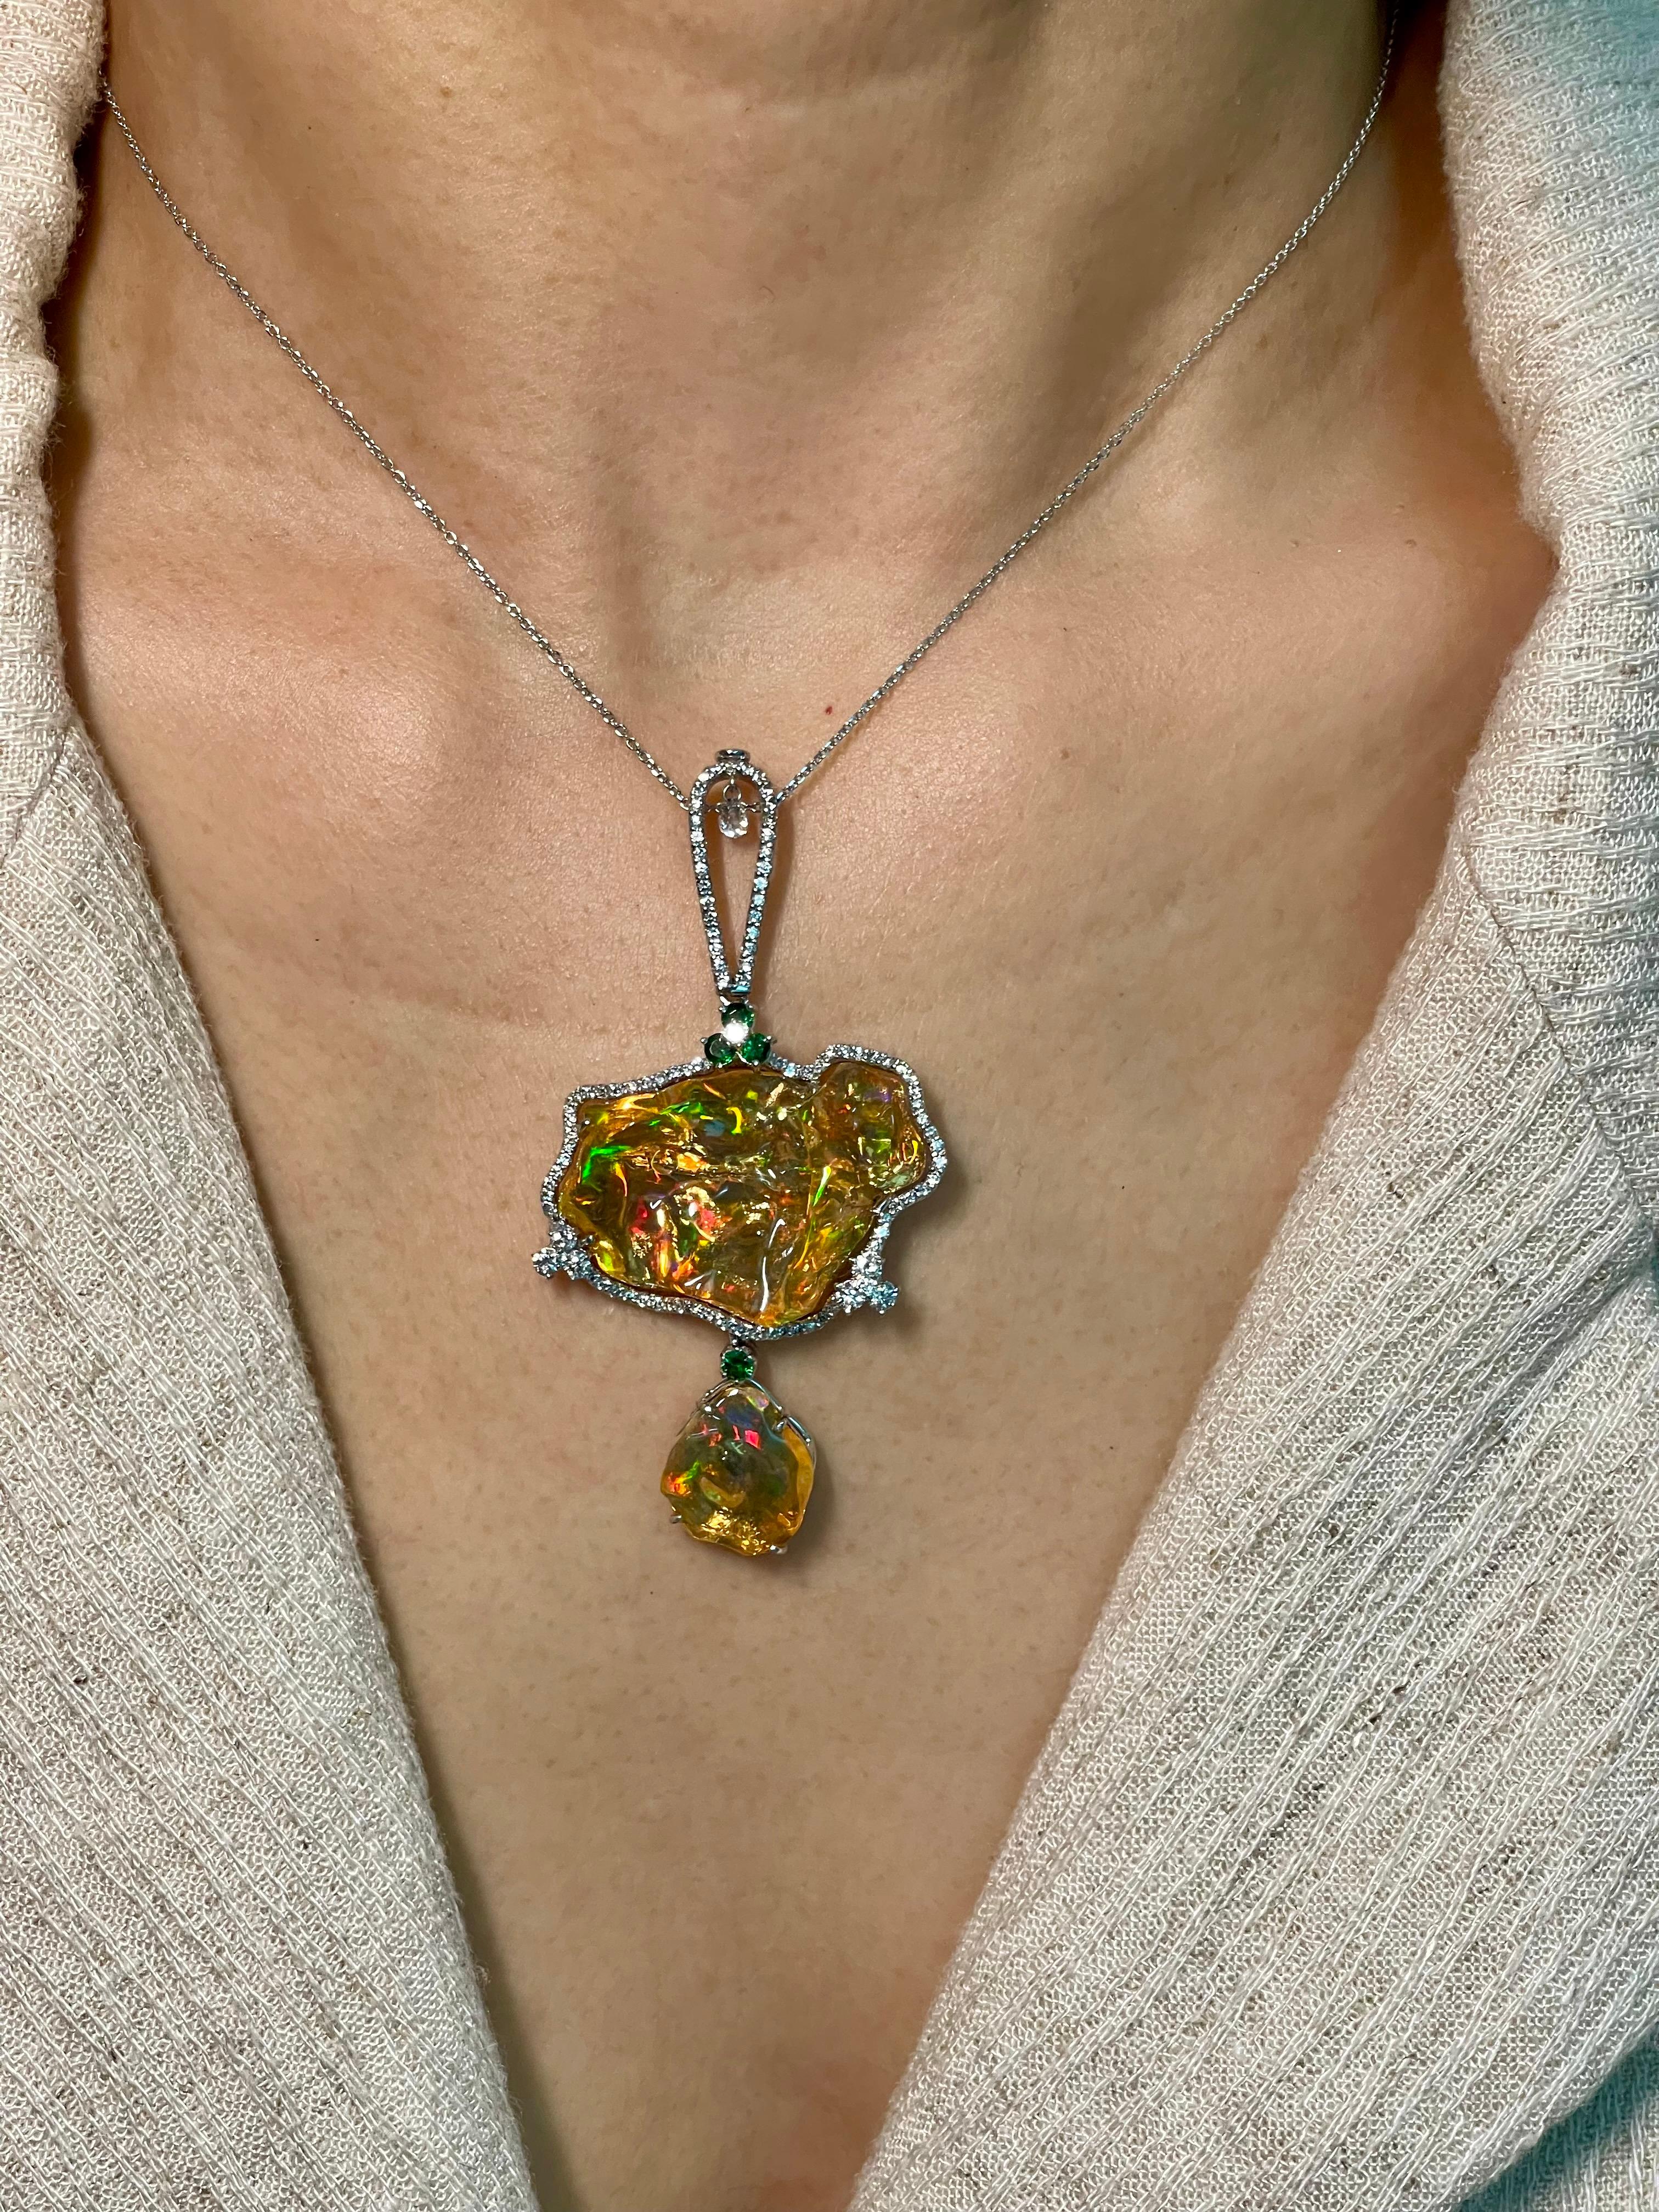 This is a nice substantial statement piece! 2 pieces of top gem quality opals make up this large pendant.   The natural Mexican fire opals are complimented by Tsavorites and white diamonds. The opals have superb play of colors. The natural opals in